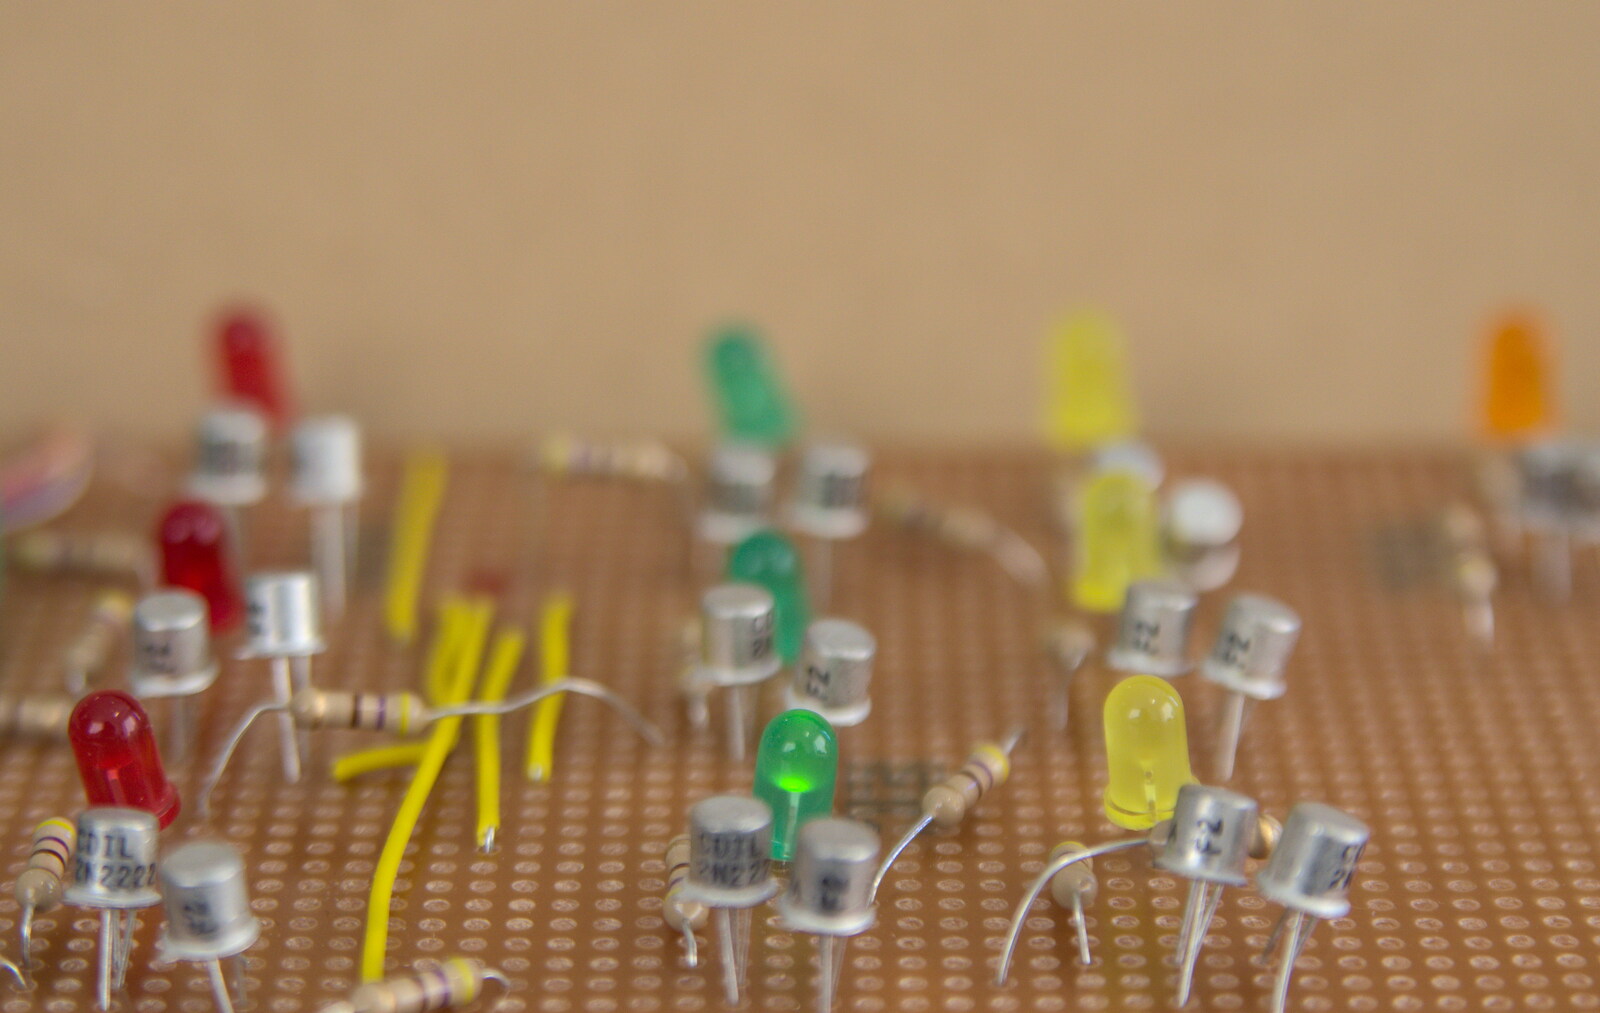 LEDs and transistors on a circuit board from SwiftKey Innovation Week, Southwark Bridge Road, London - 7th October 2015